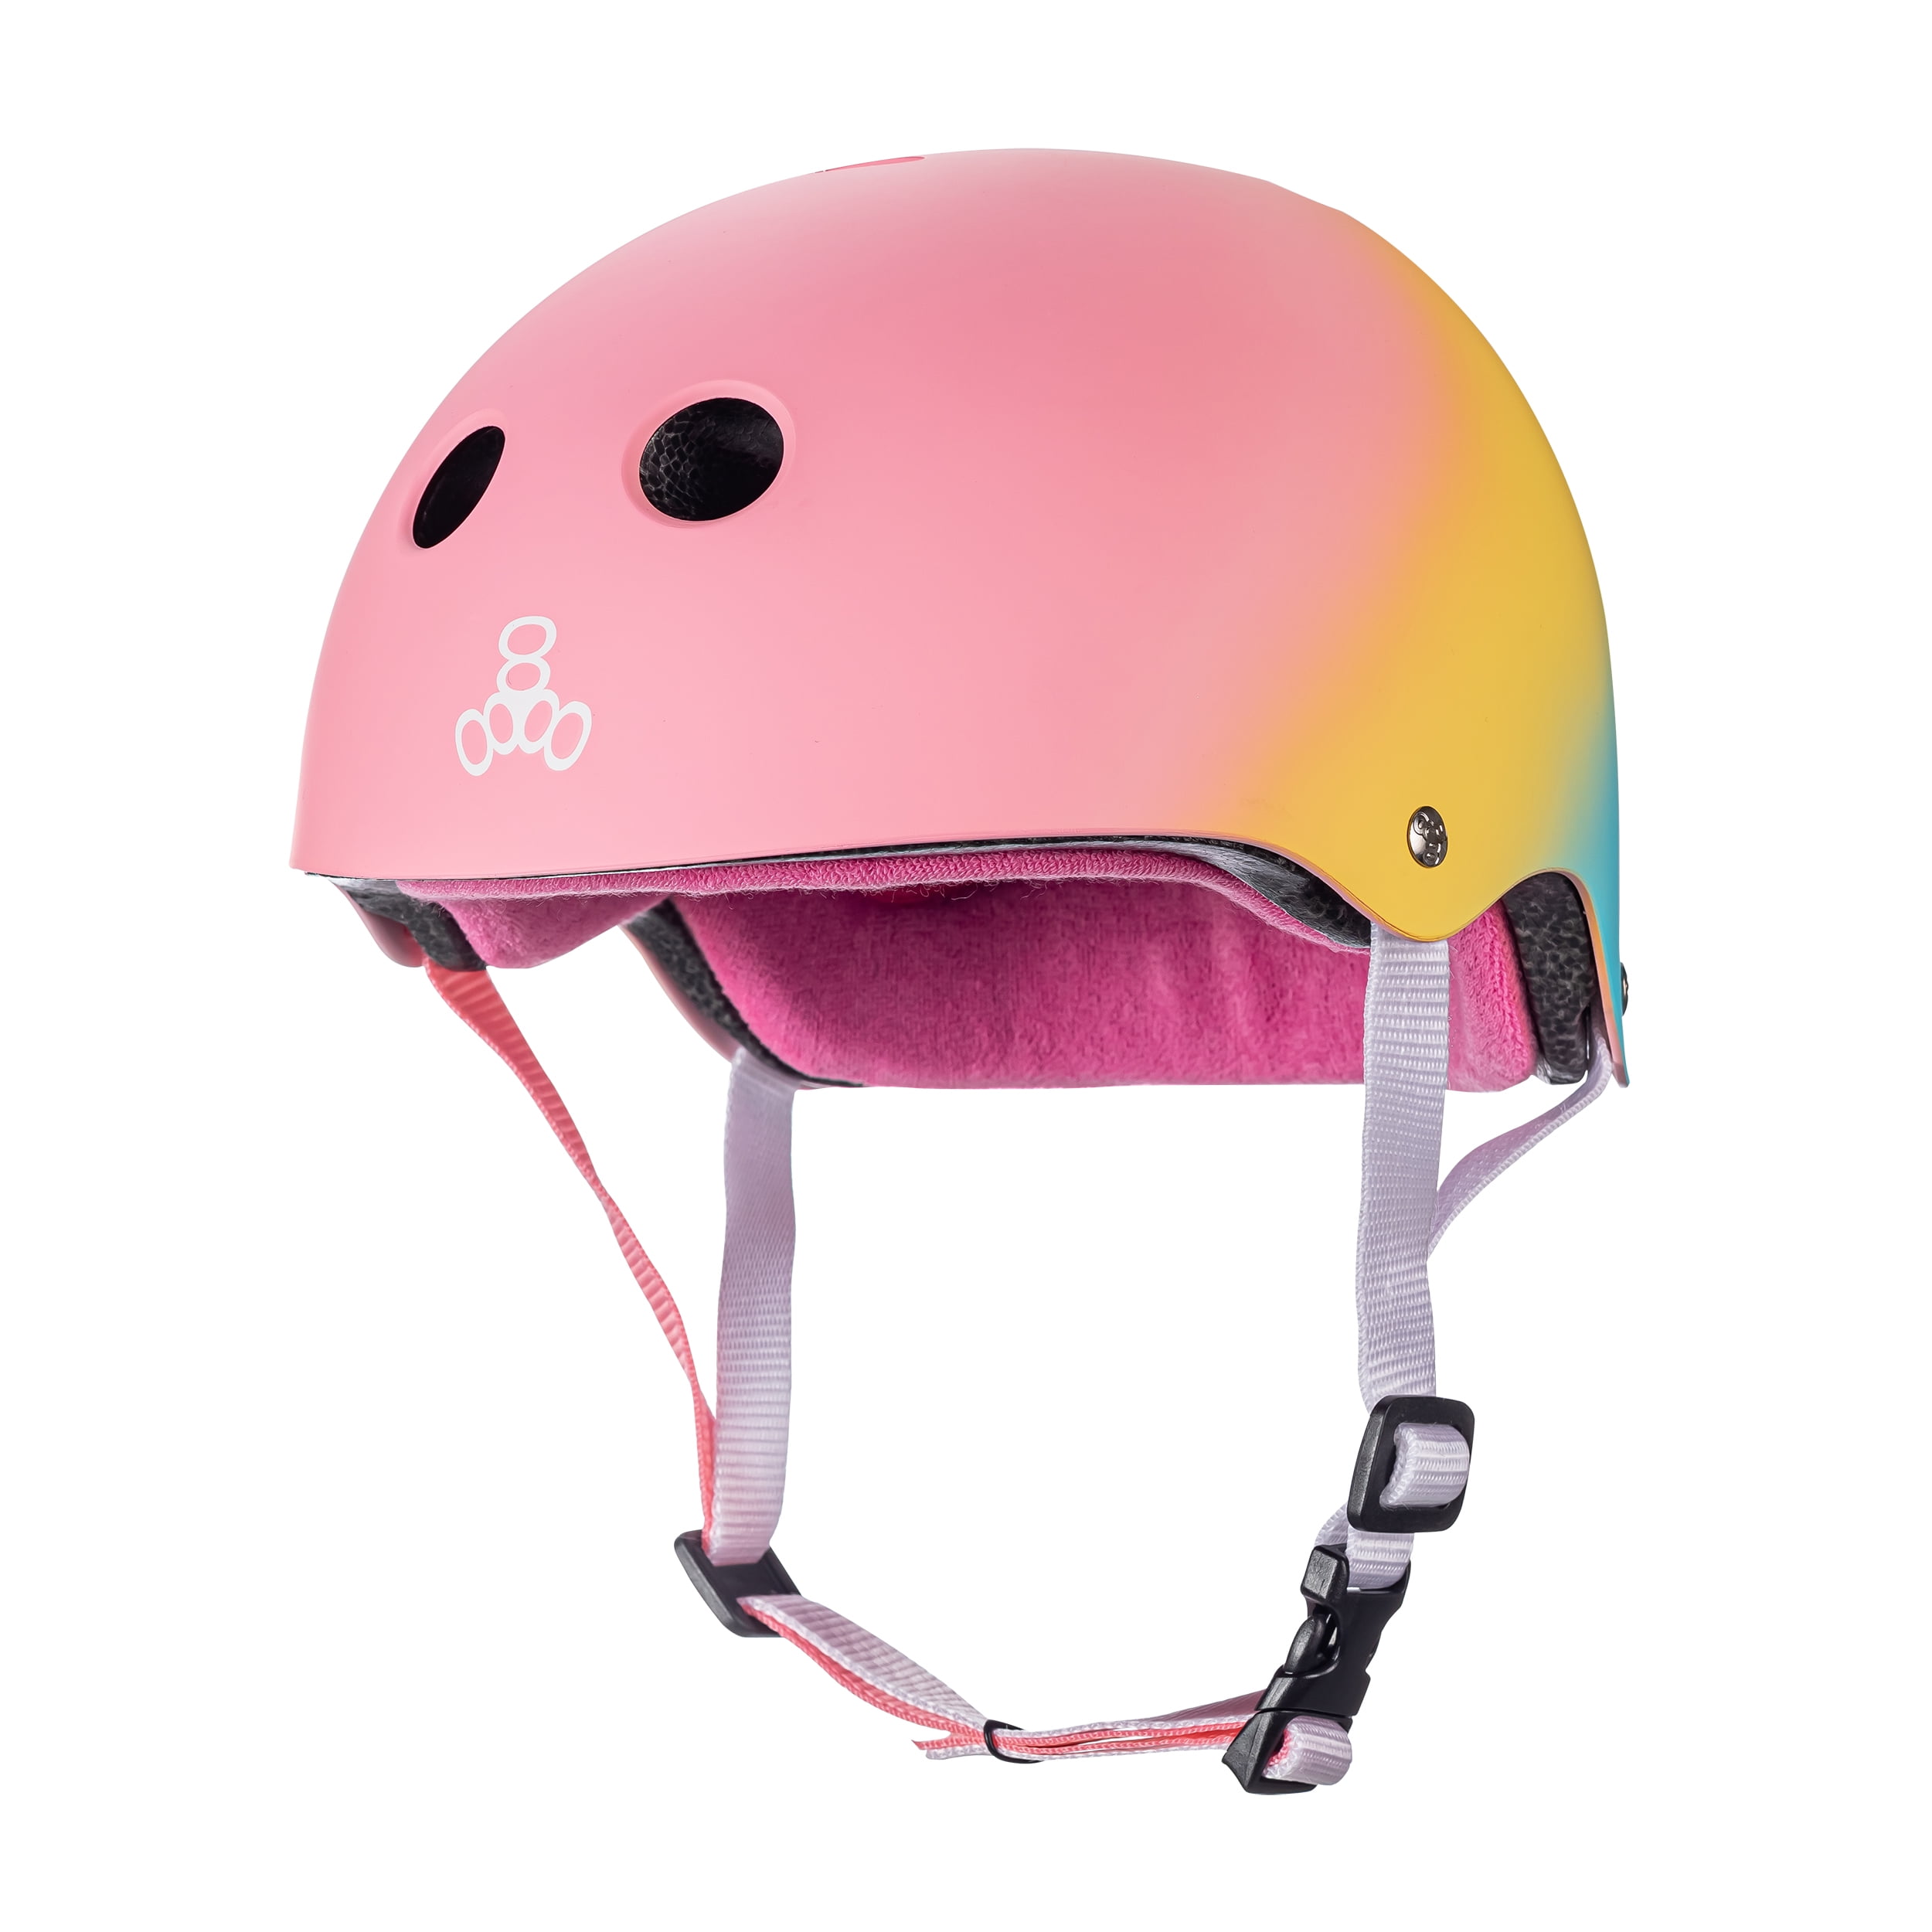 Skateboarding and BMX Triple Eight The Certified Sweatsaver Helmet with Visor for Roller Derby